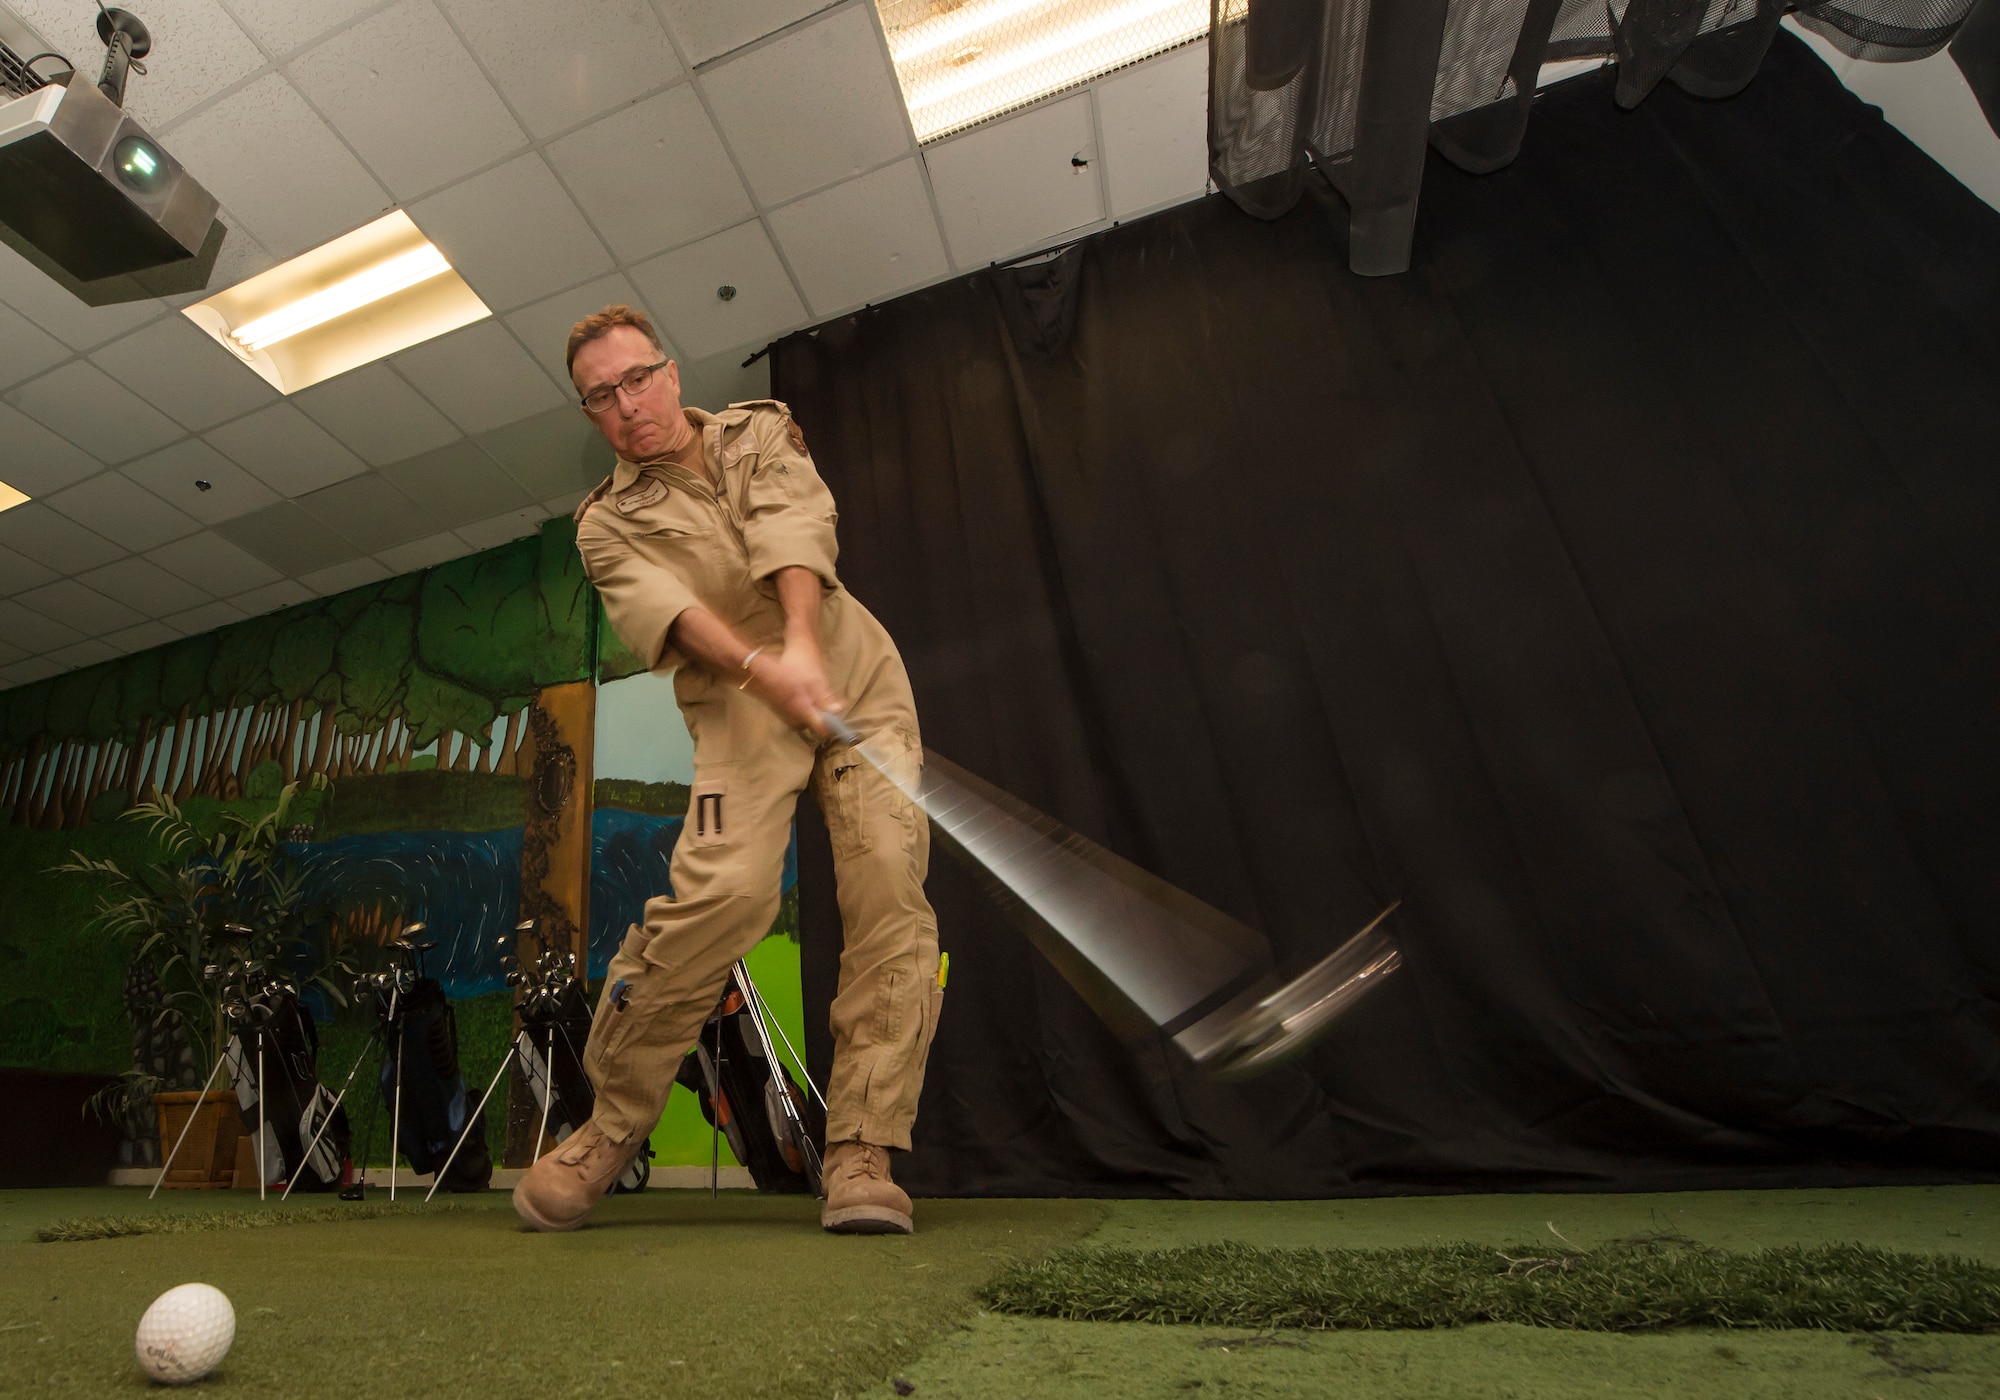 Being deployed thousands of miles from home can be challenging, but some service members take time to increase the quality of life for service members here.

When Royal Canadian Air Force Maj. Cameron ‘Divot’ Lowdown, 609th Air Operations Center senior offensive duty officer, visited the installation’s golf simulator, he saw more than a chance to practice his swing … he saw an opportunity to give back.